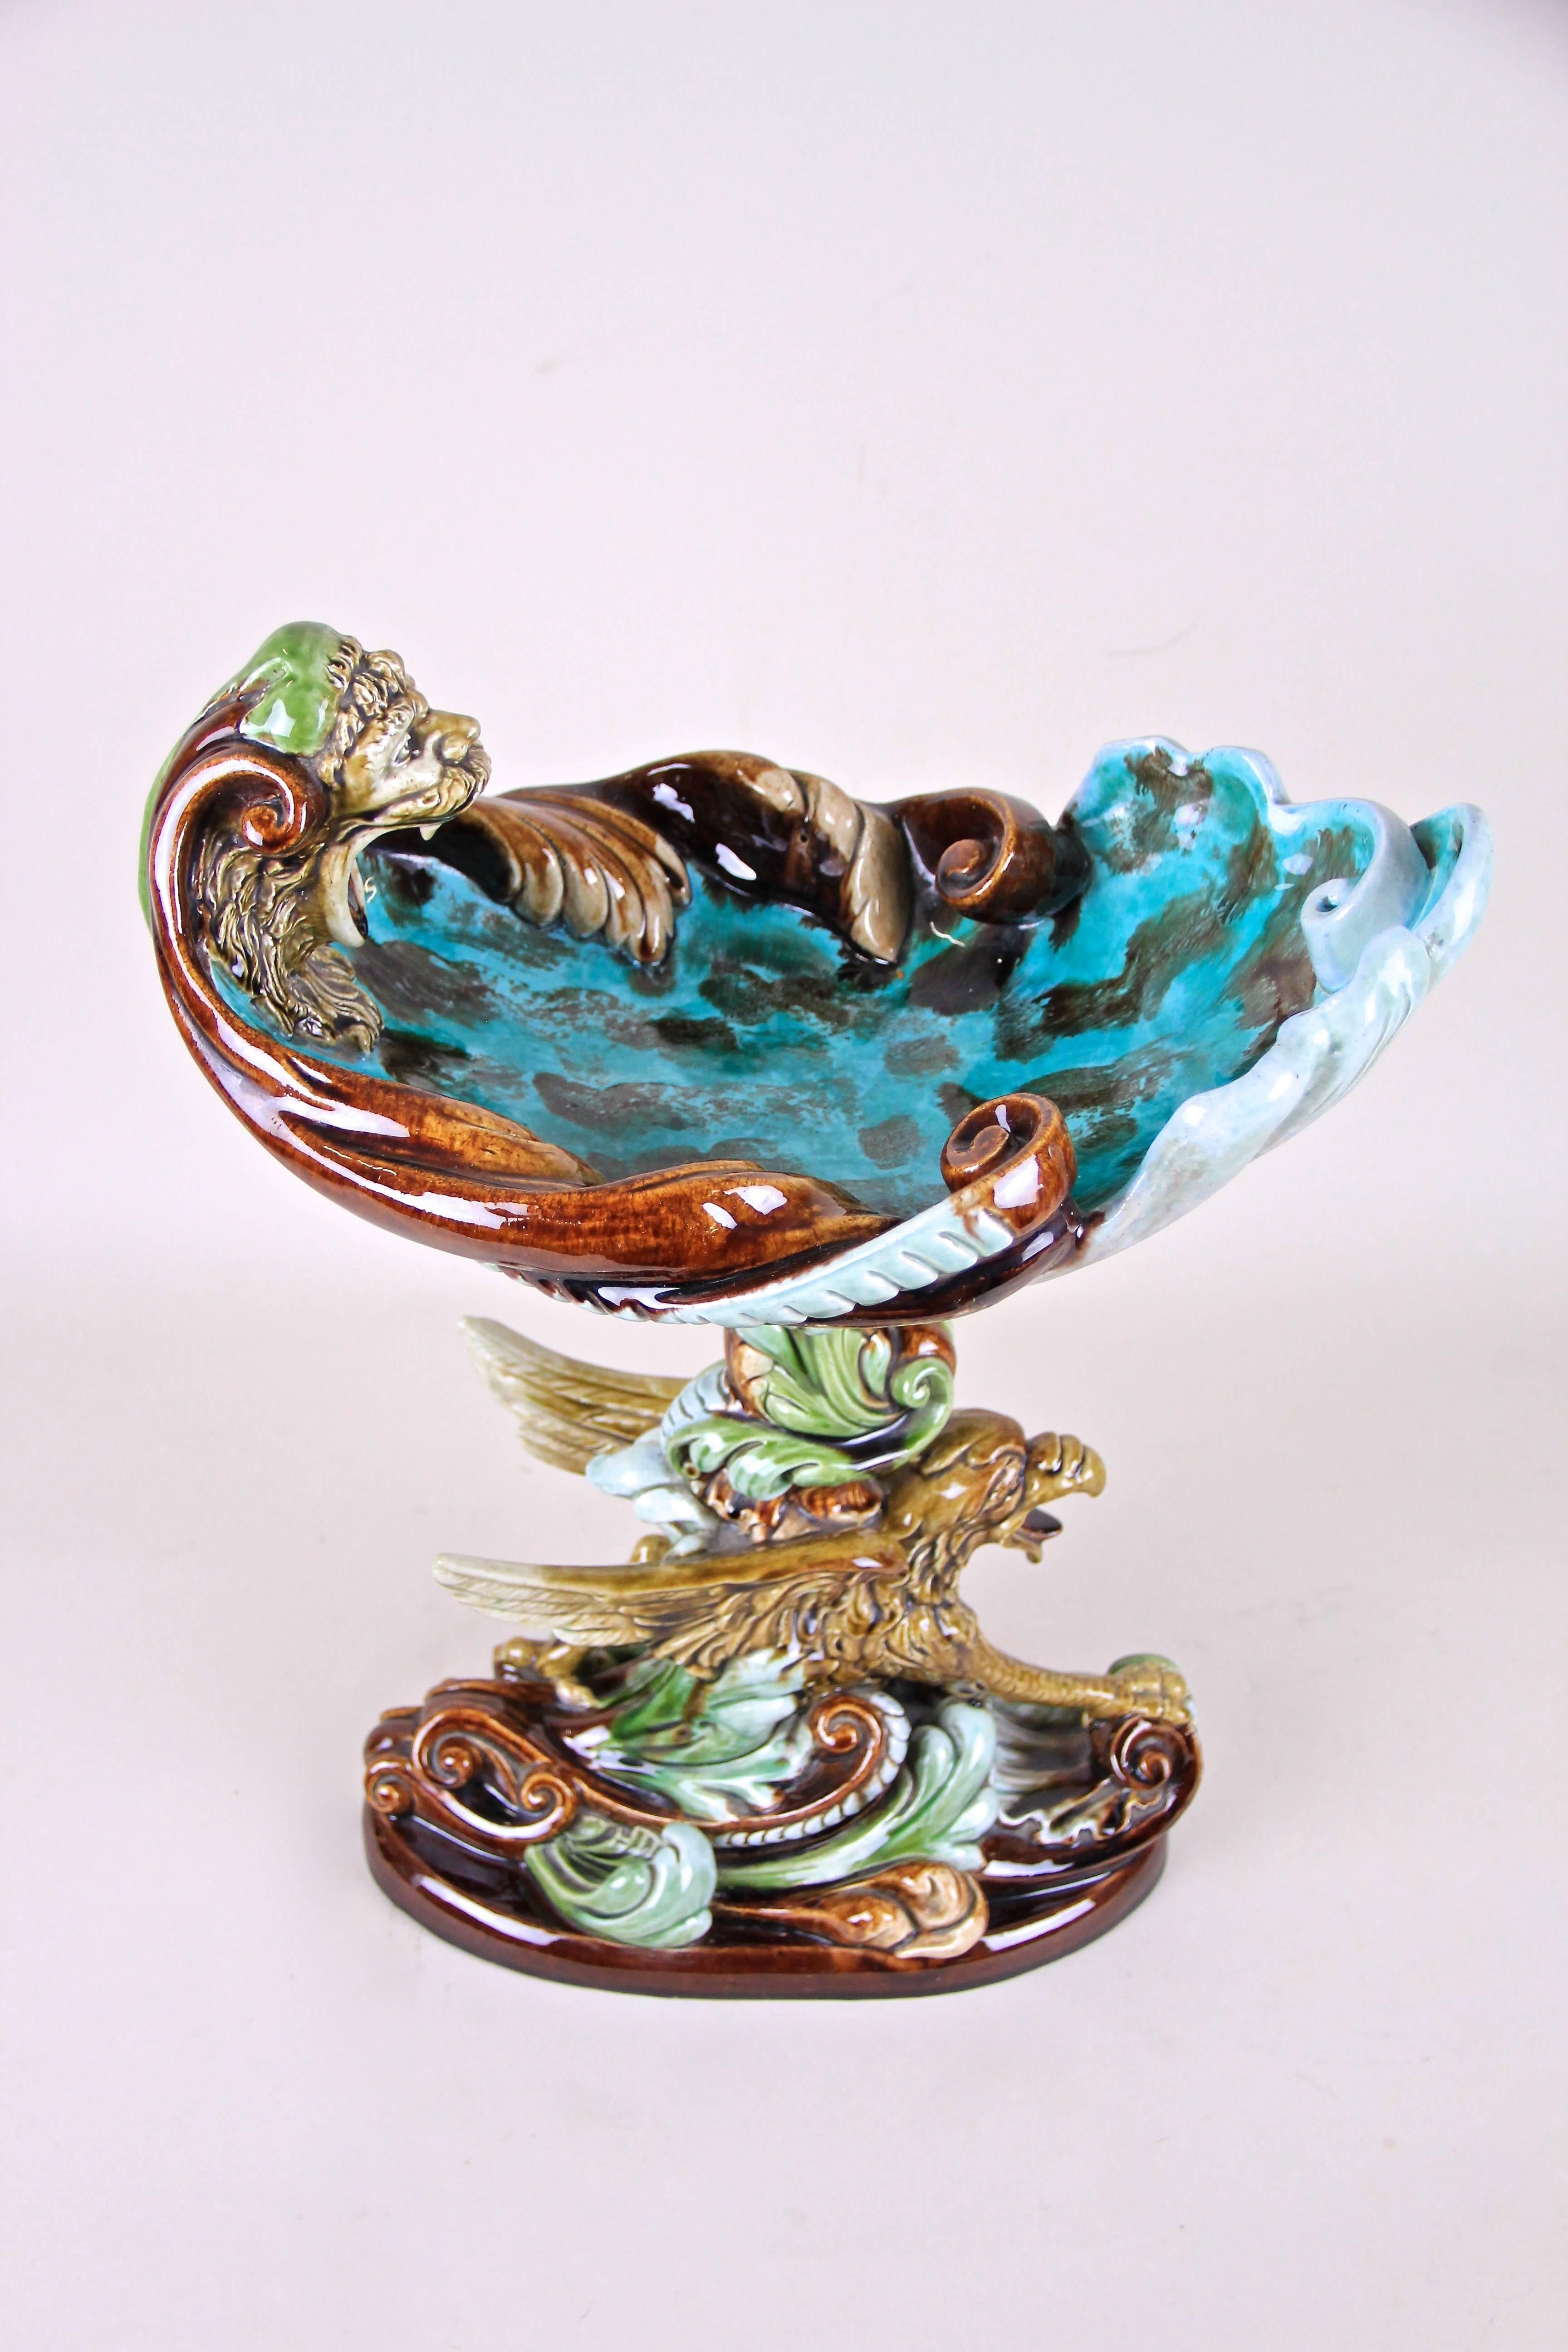 We are very proud to present to you this breathtaking large Majolica Centerpiece by Wilhelm Schiller & Son, the famous majolica manufactory out of Bohemia. An exceptional masterpiece of early Art Nouveau majolica art around 1890. Beautifully